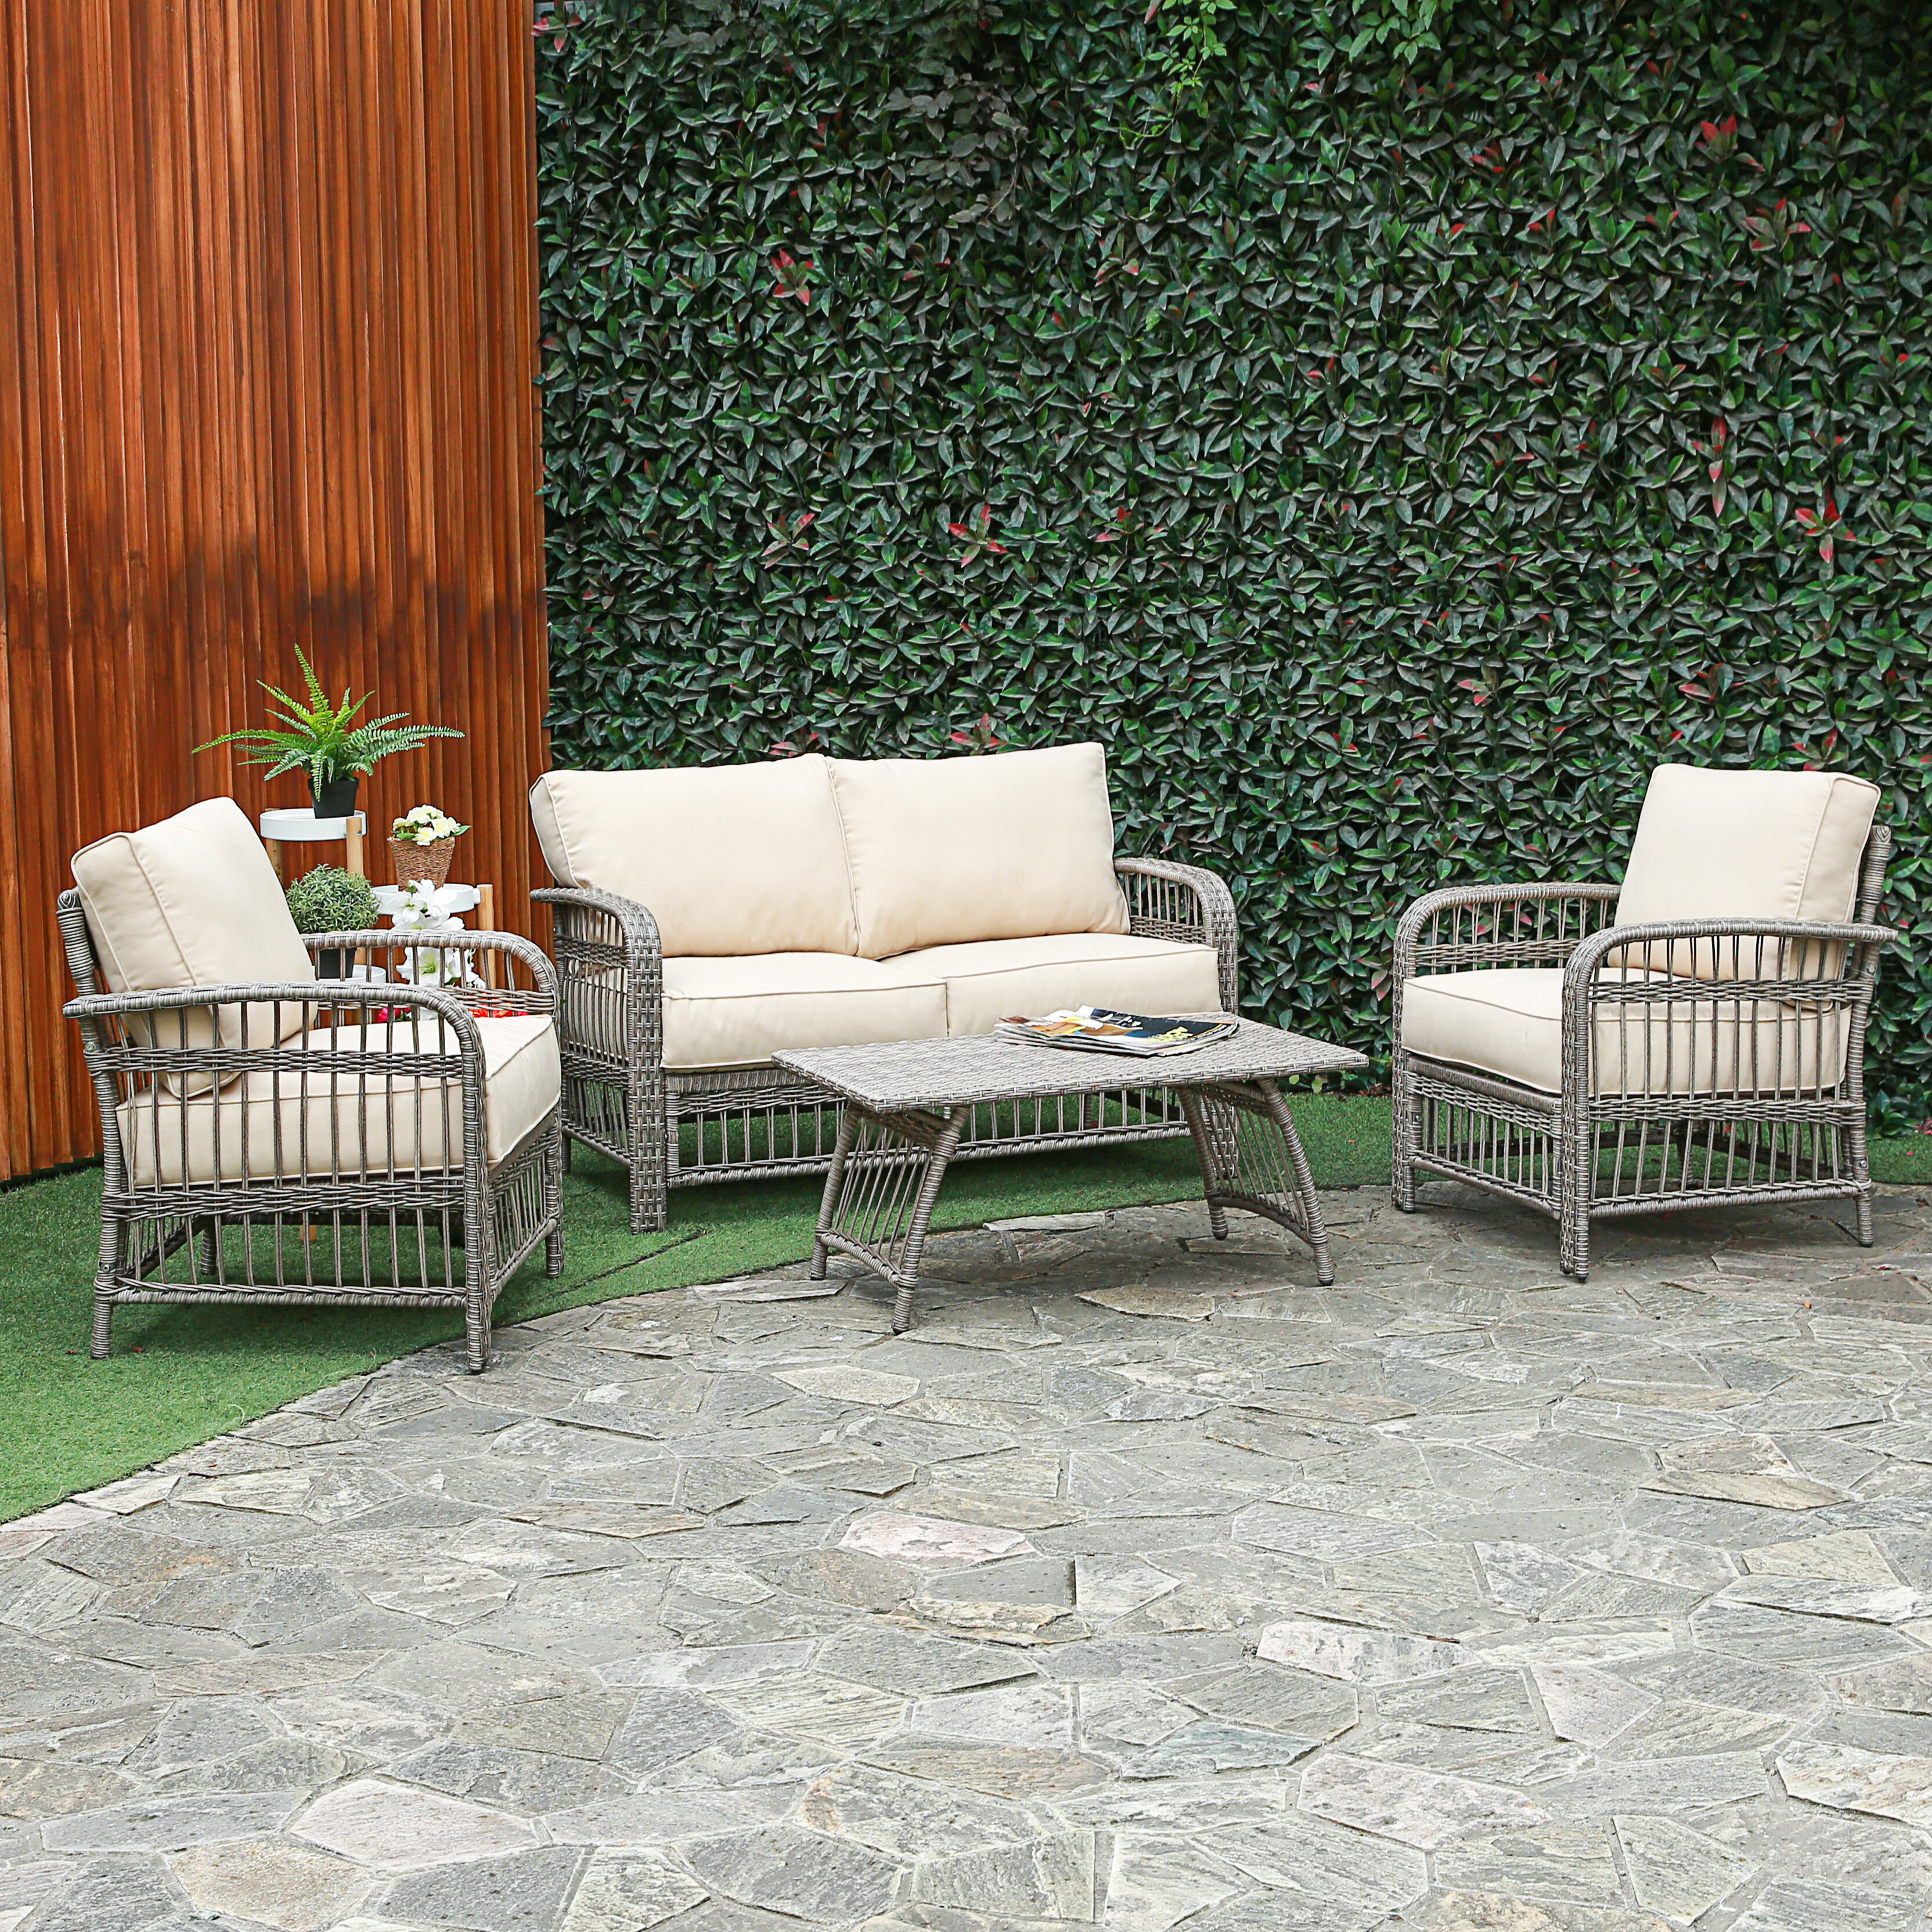 Rona 4 Piece Rattan Sofa Seating Group With Cushions regarding dimensions 3328 X 3328